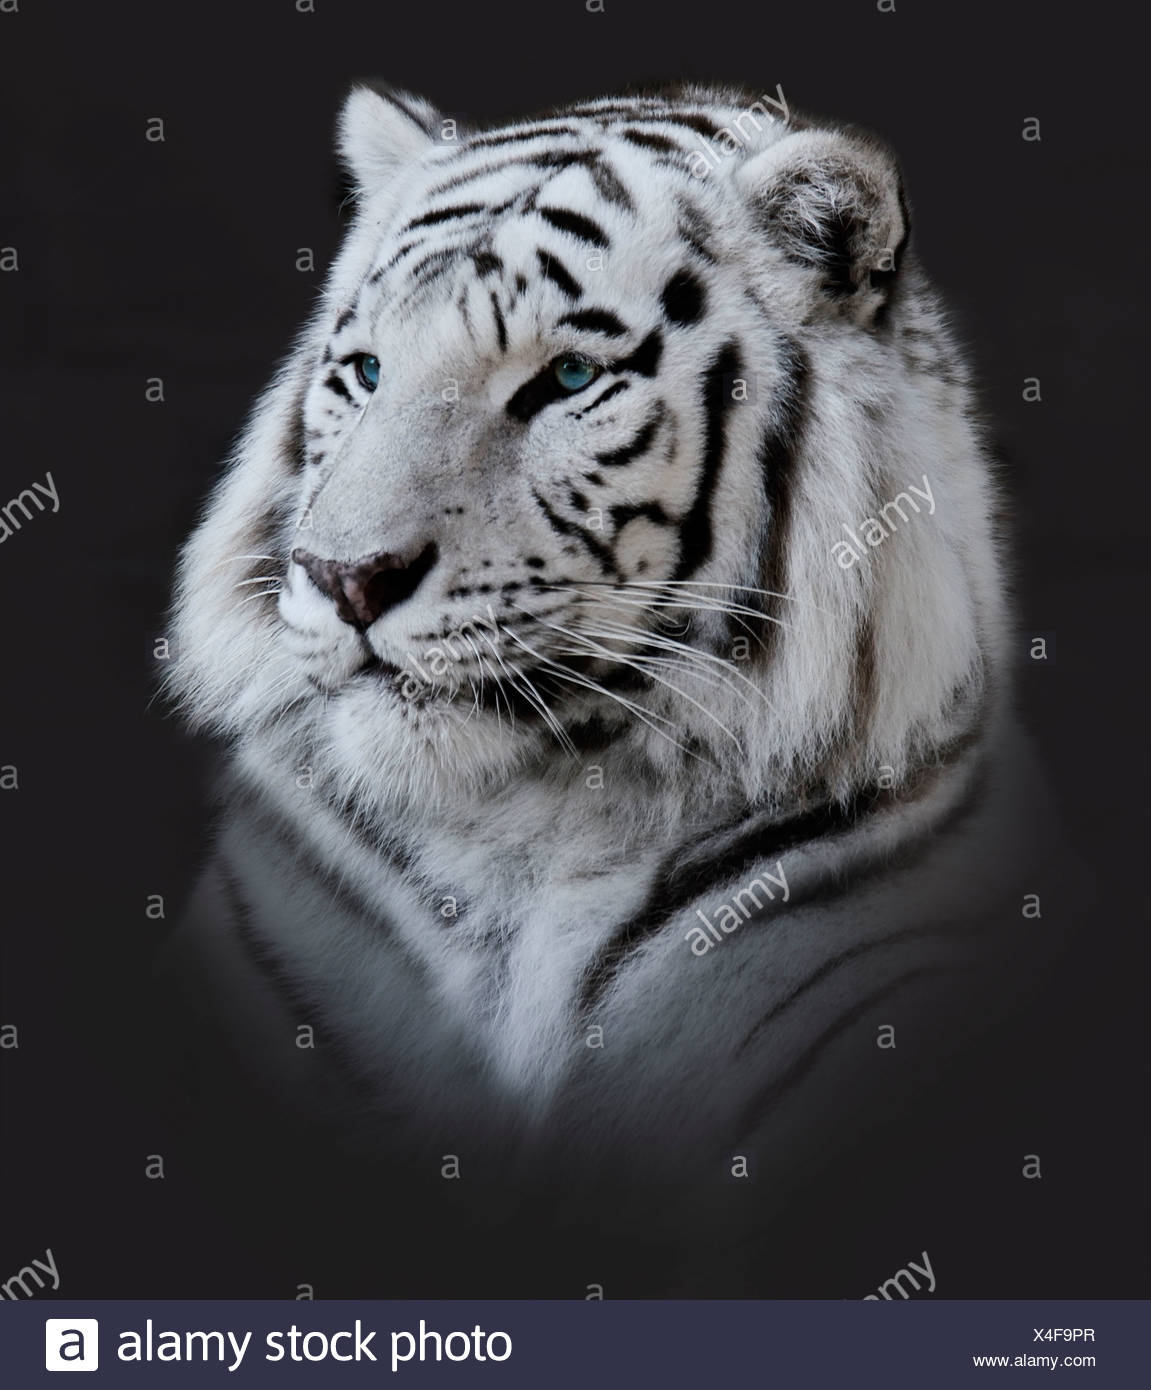 White Tiger Portrait High Resolution Stock Photography And Images Alamy